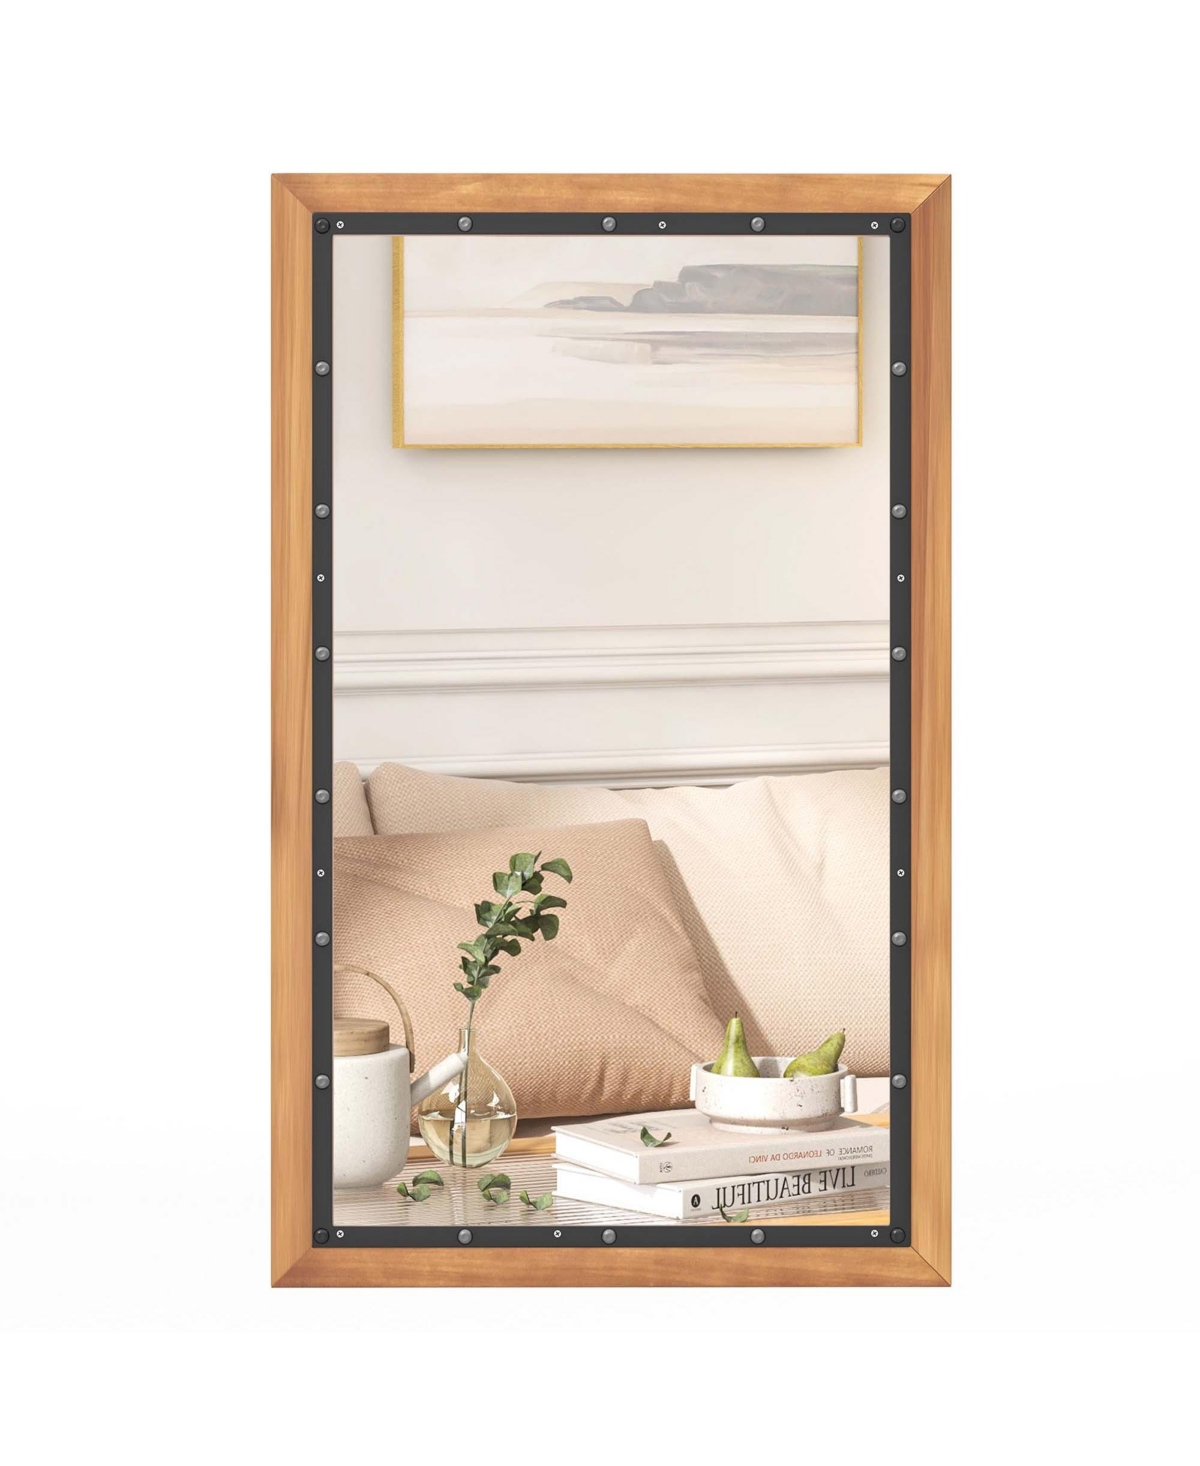 Rectangular Wall Mount Mirror 22'' x 36'' Wood Framed Vanity Decor withHanging Hooks - Natural